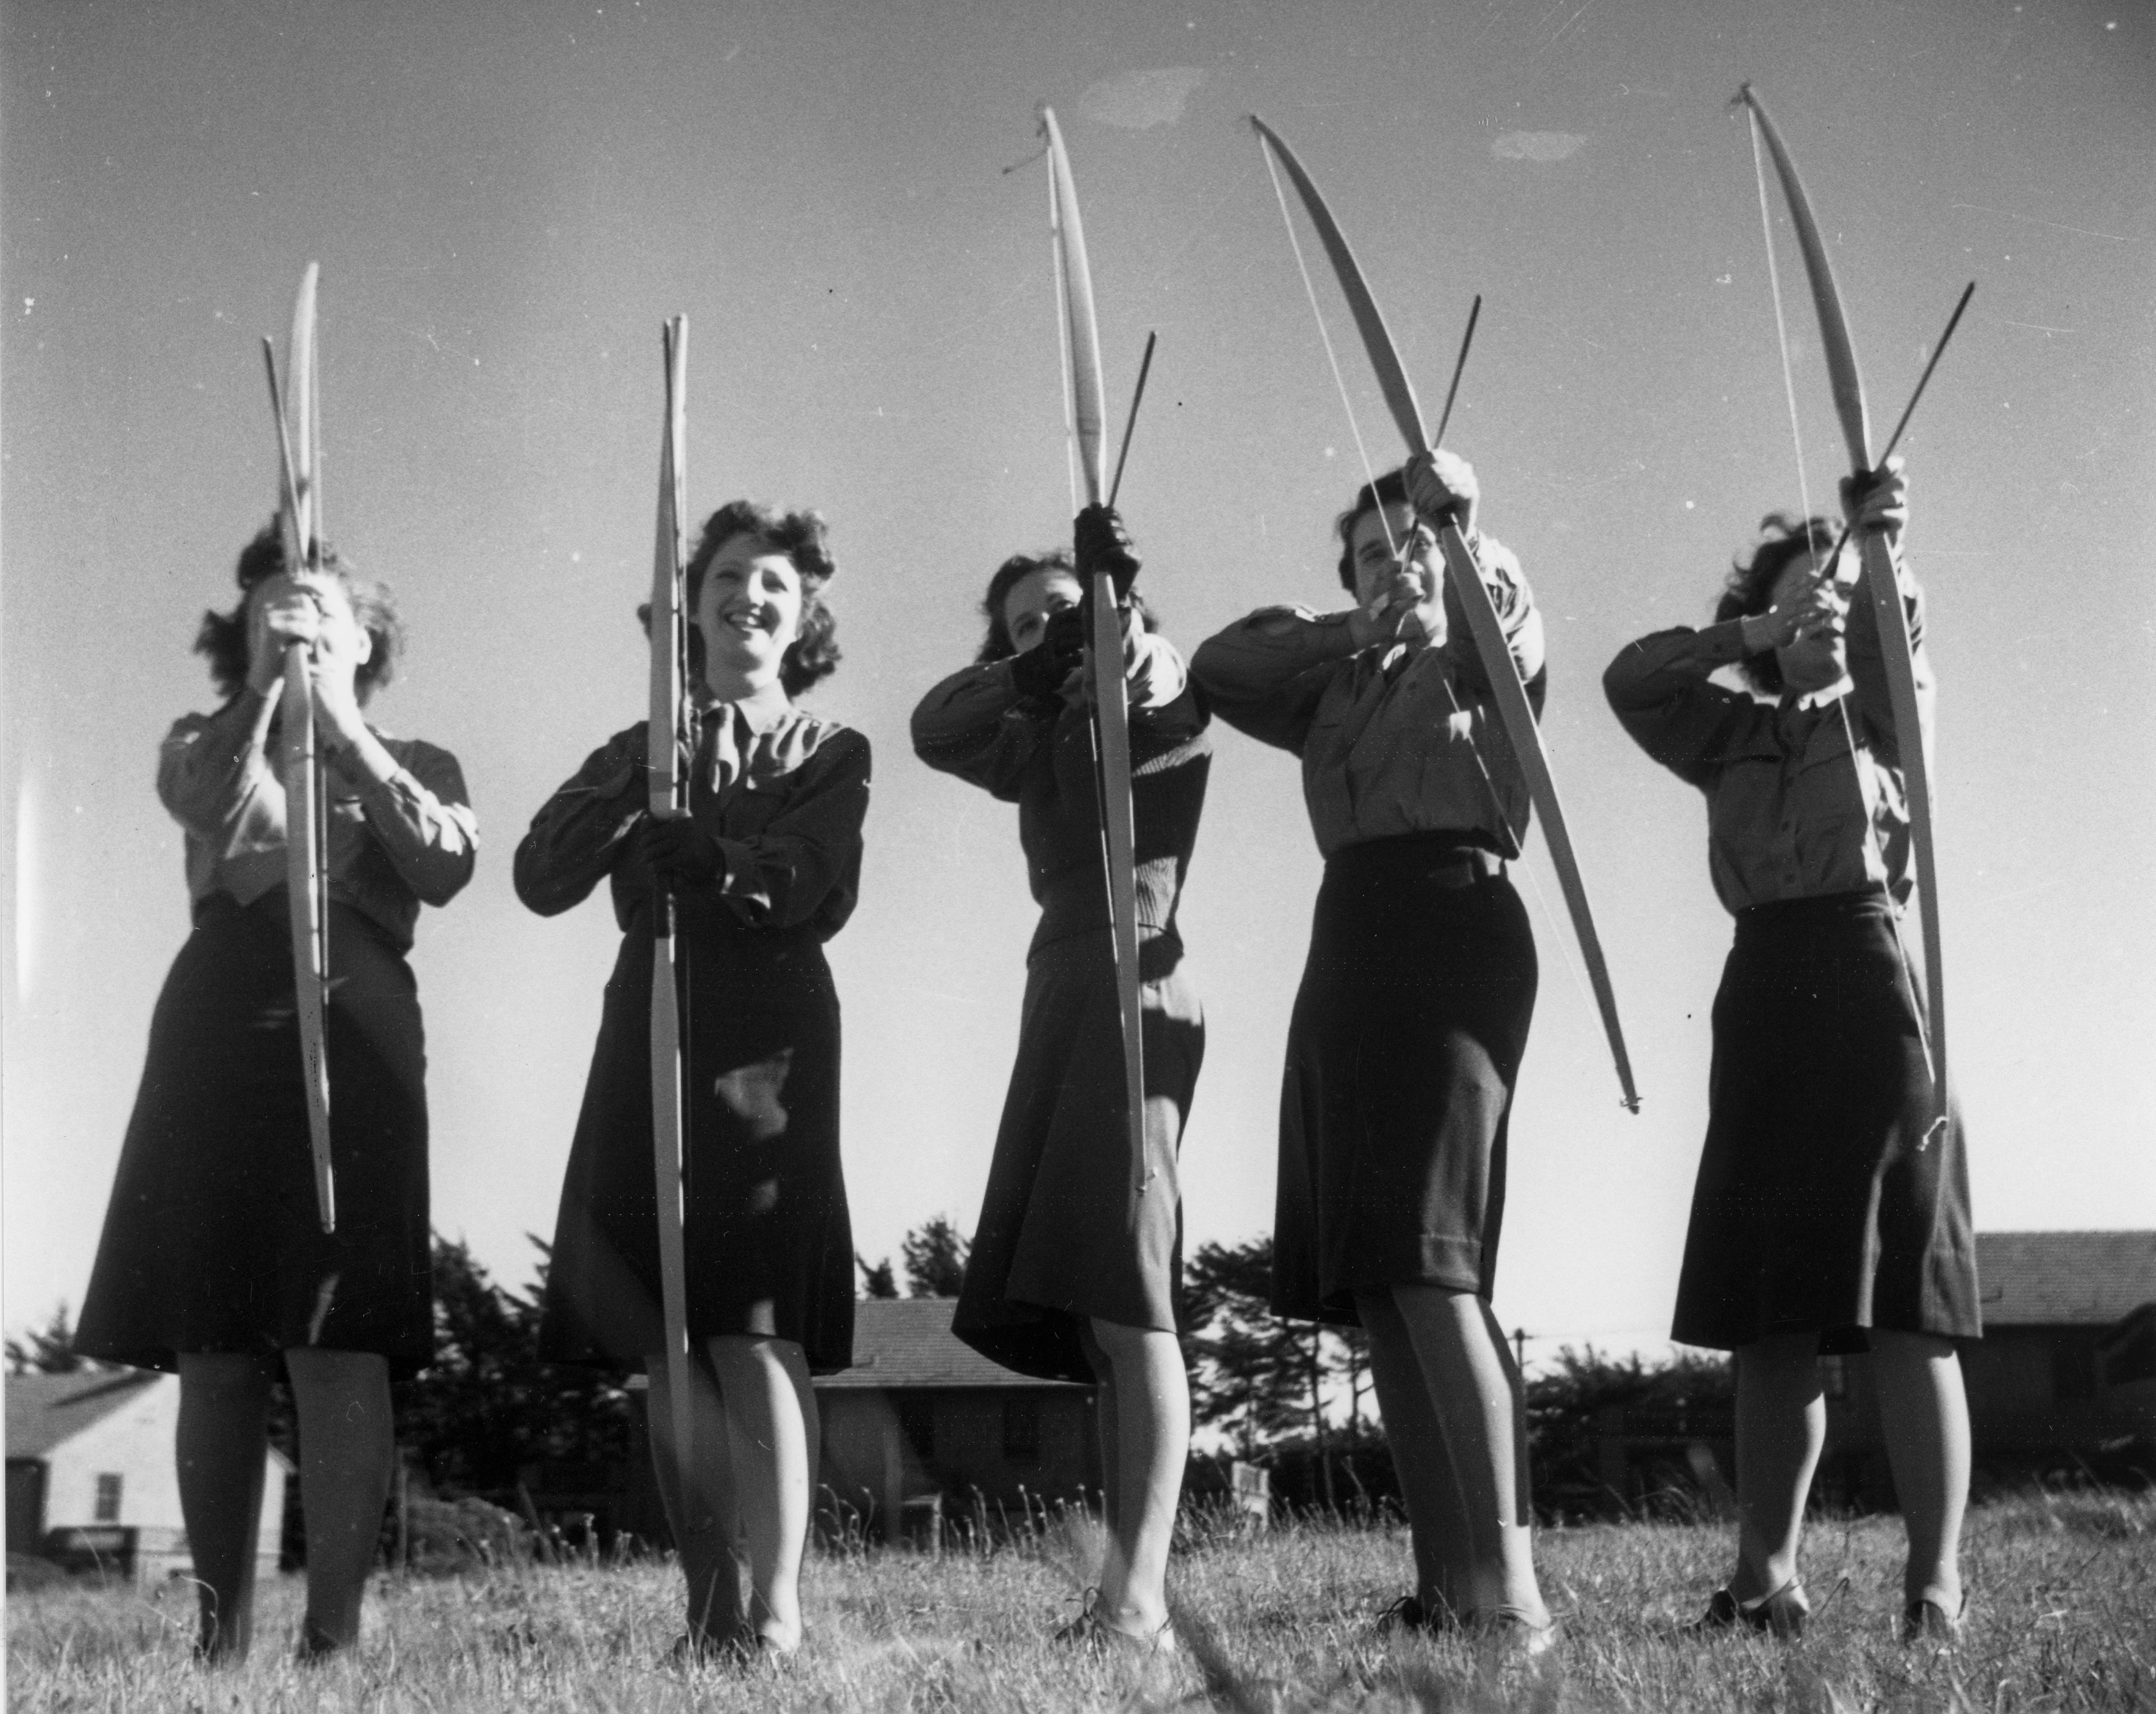 Black and white picture of 5 women holding bows and arrows from the women's army corps.